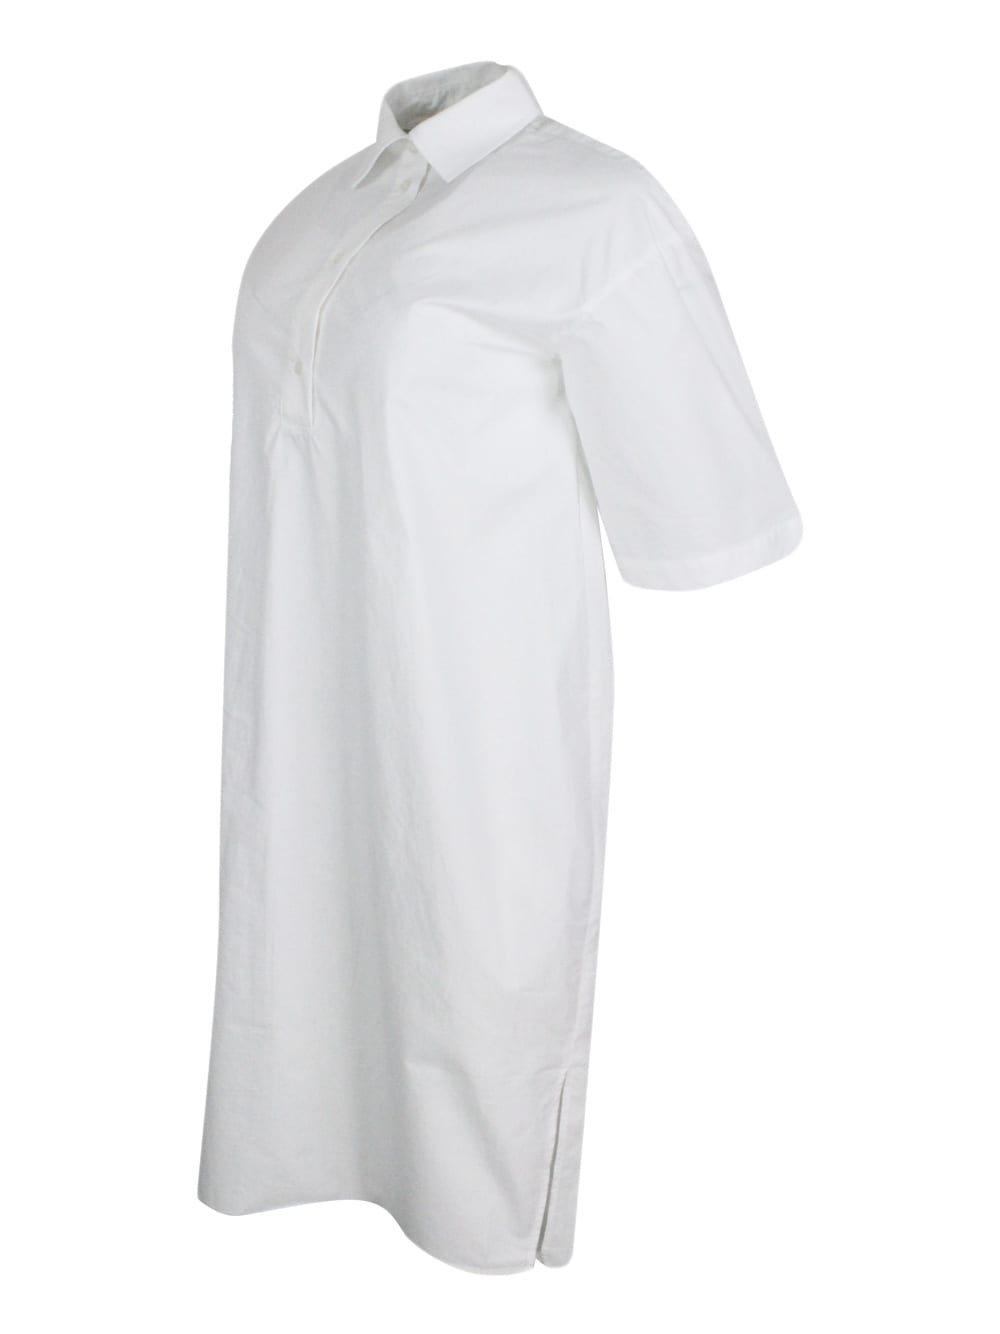 Shop Armani Collezioni Dress Made Of Soft Cotton With Short Sleeves, With Collar And 4 Button Closure. Side Slits On The Bo In White